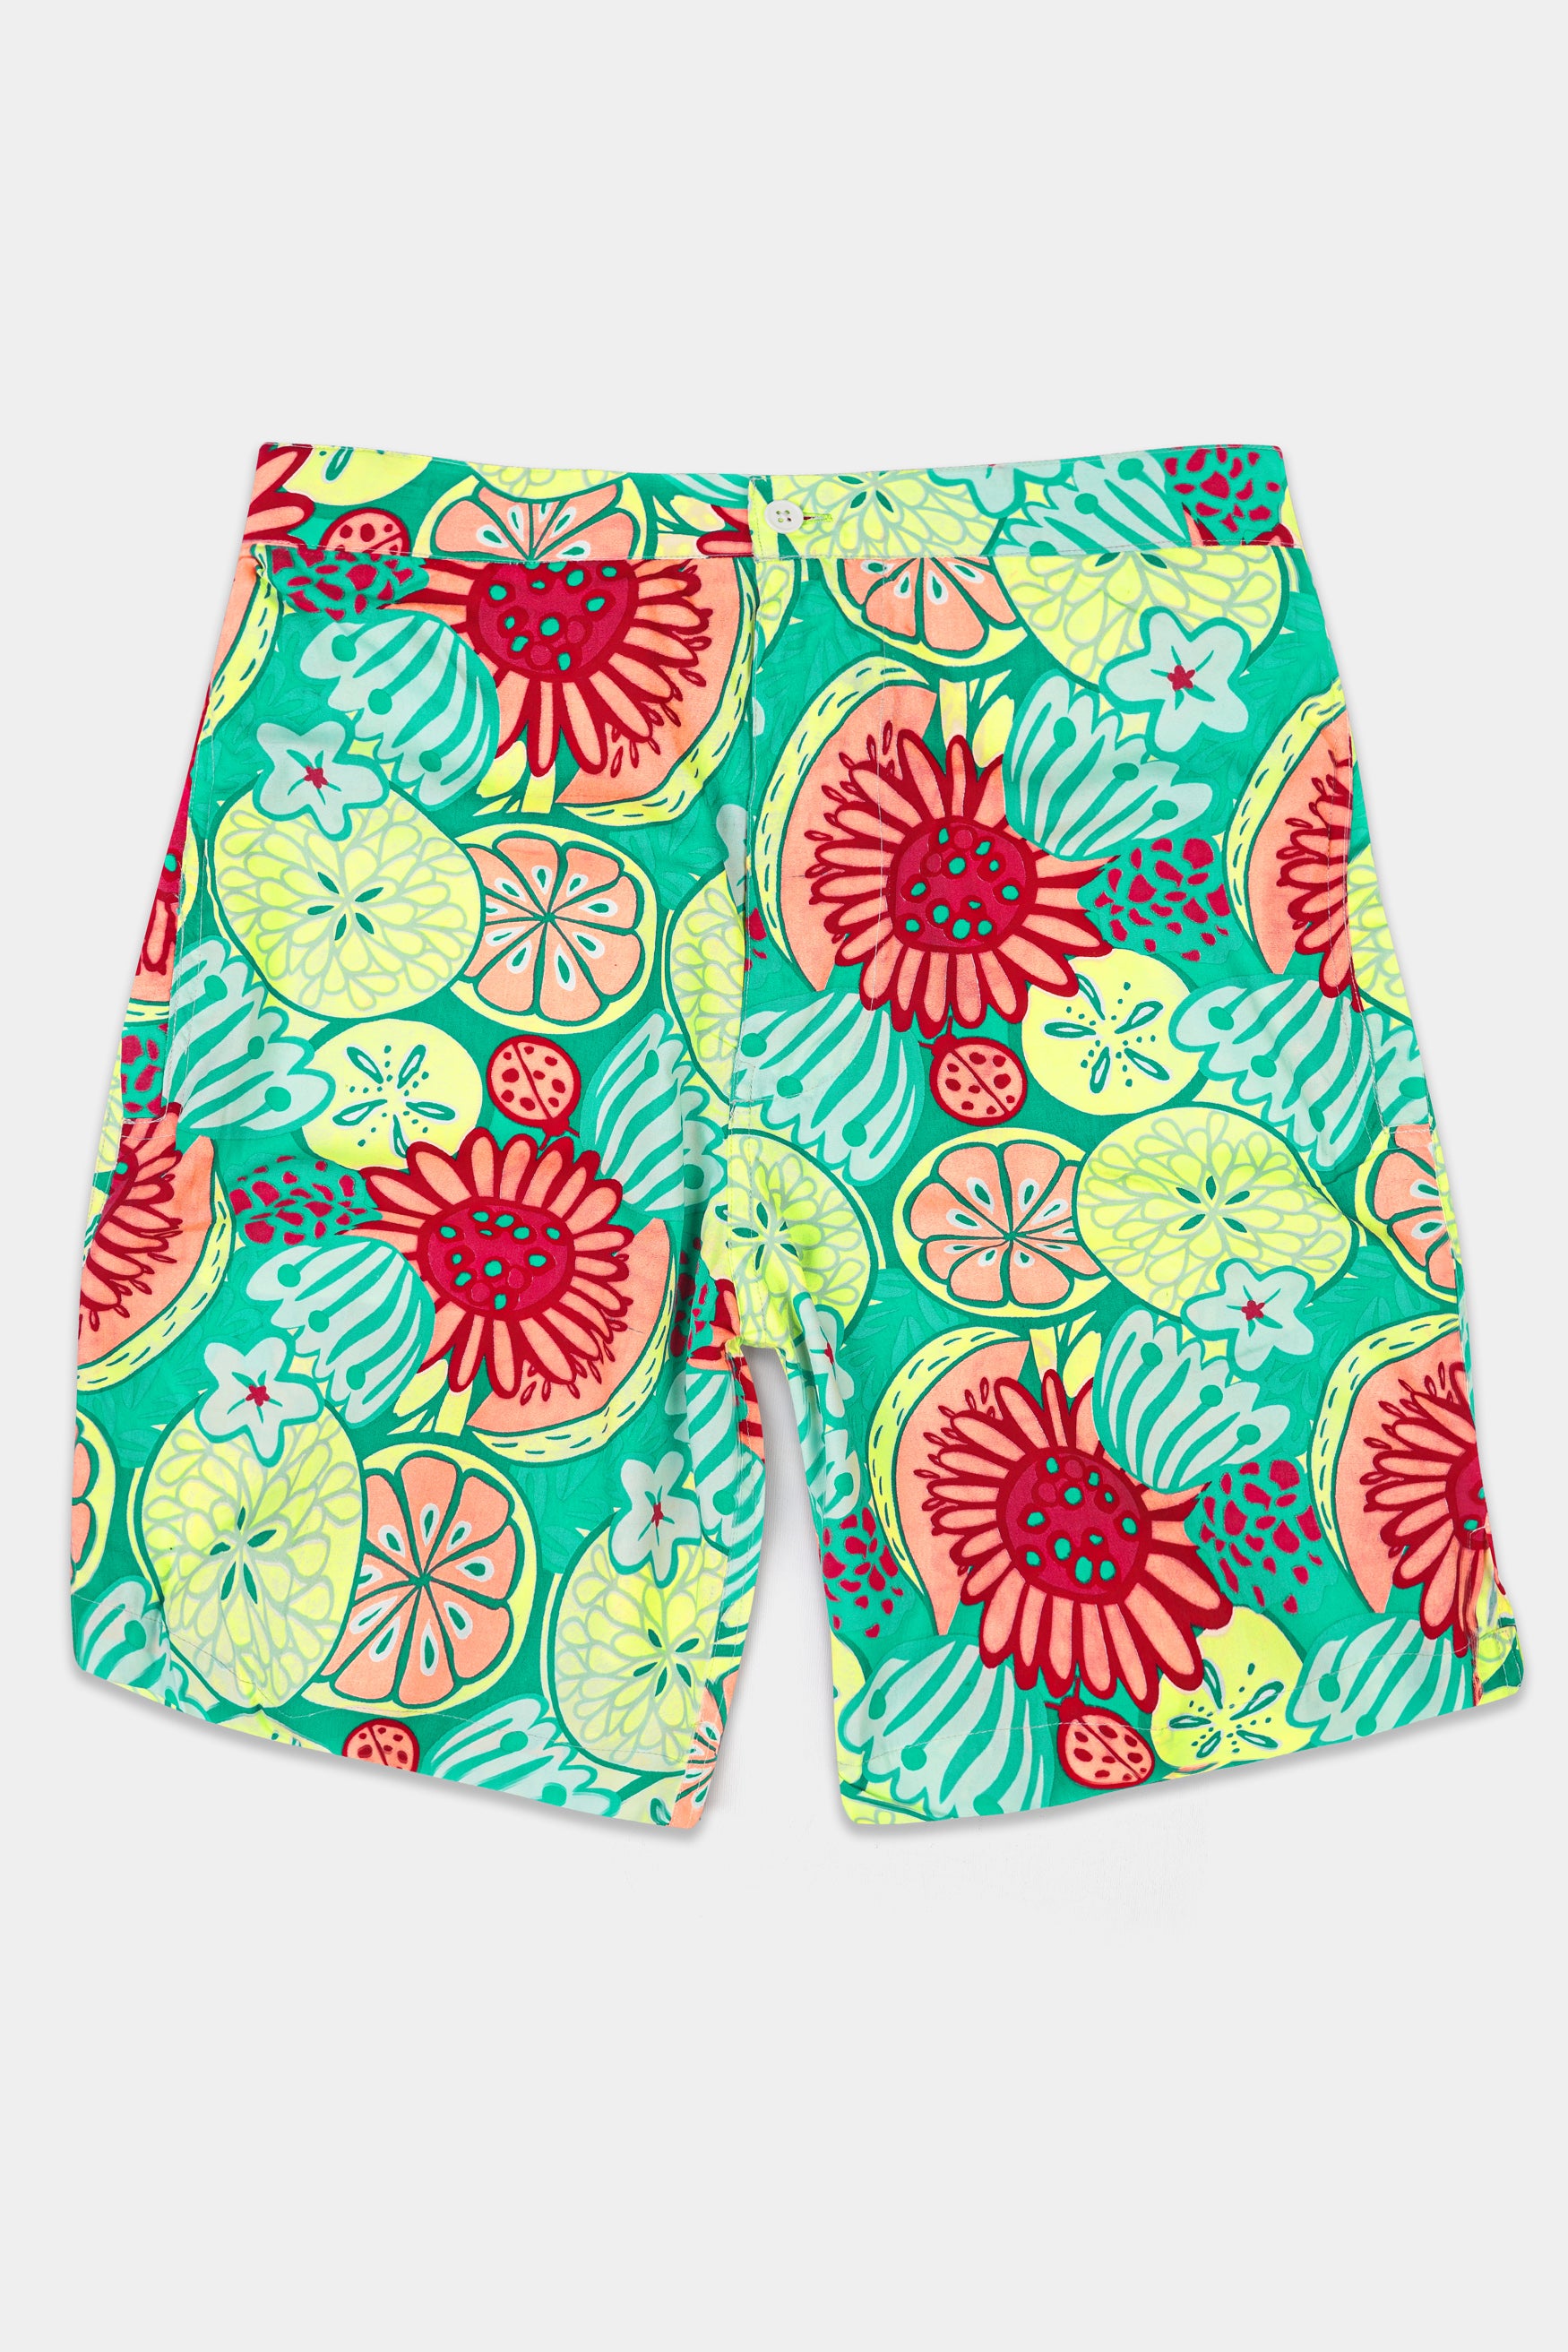 Caribbean Green with Scarlet Red Floral Printed Premium Cotton Shorts SR349-28,  SR349-30,  SR349-32,  SR349-34,  SR349-36,  SR349-38,  SR349-40,  SR349-42,  SR349-44